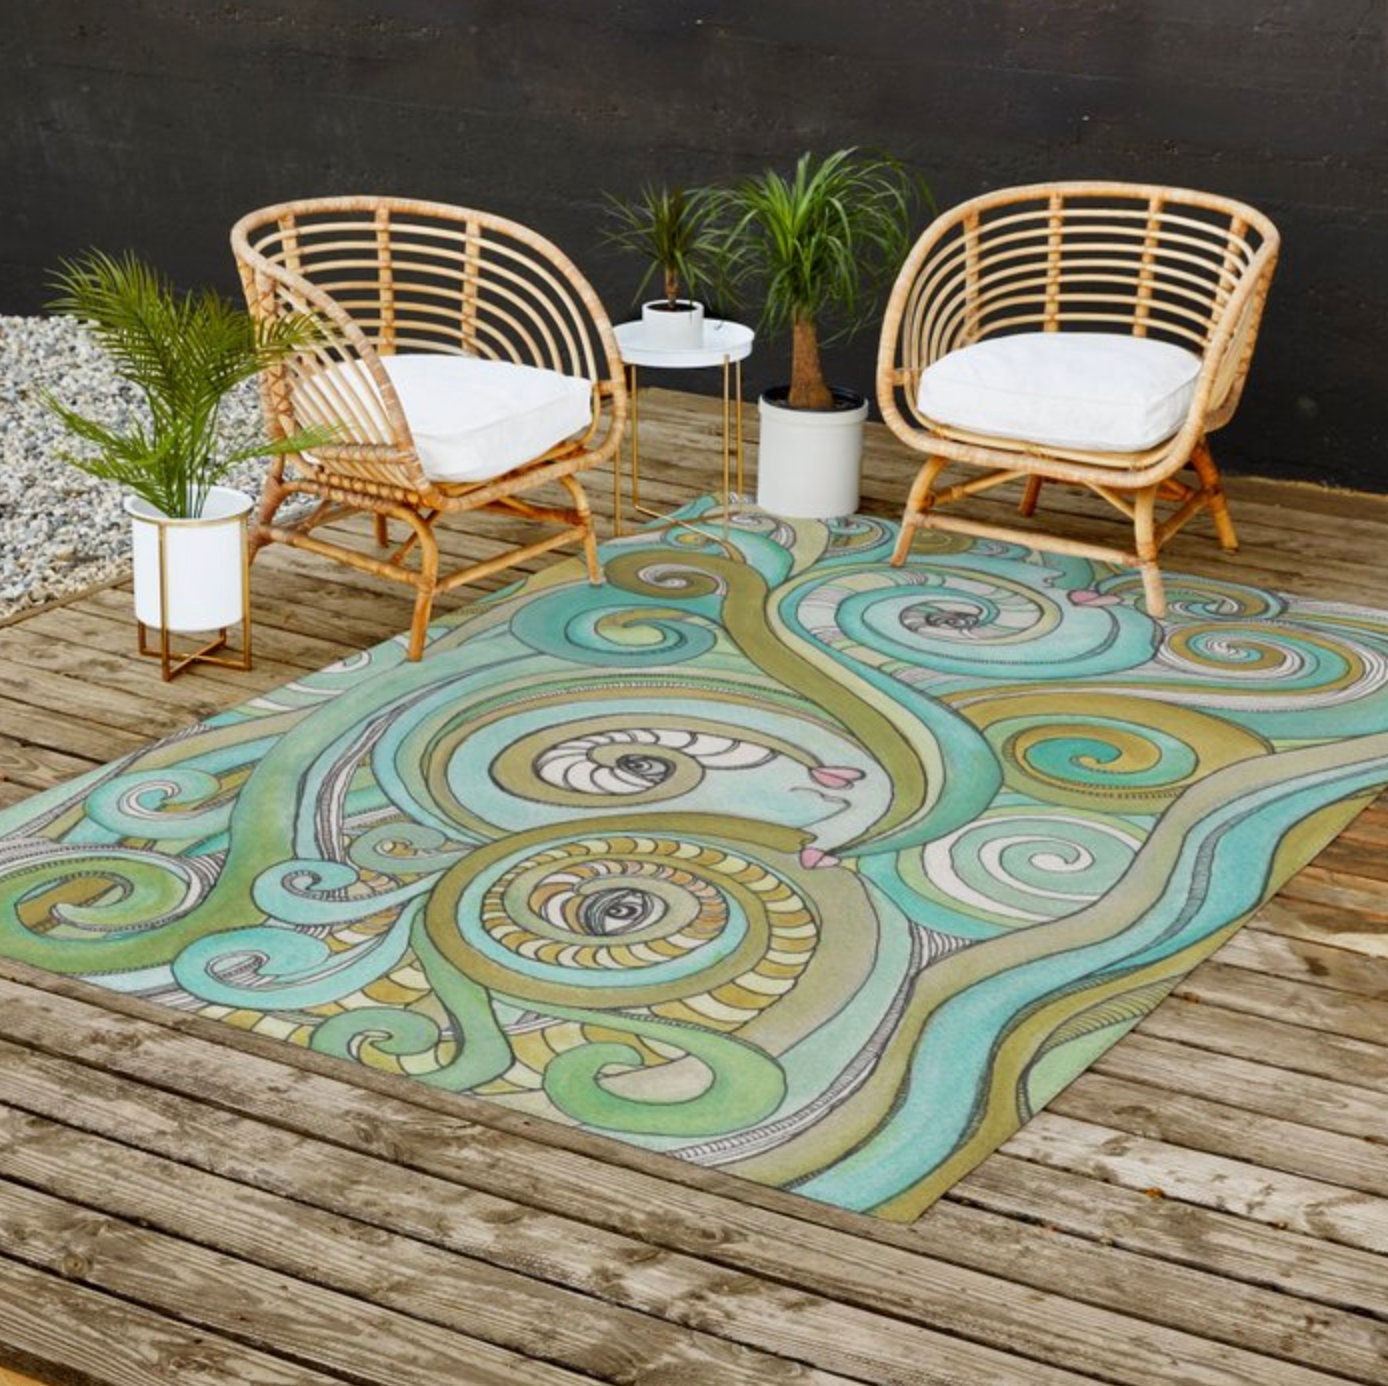 Groovy Rug for Patio, Colorful Indoor Outdoor Rug for Patio